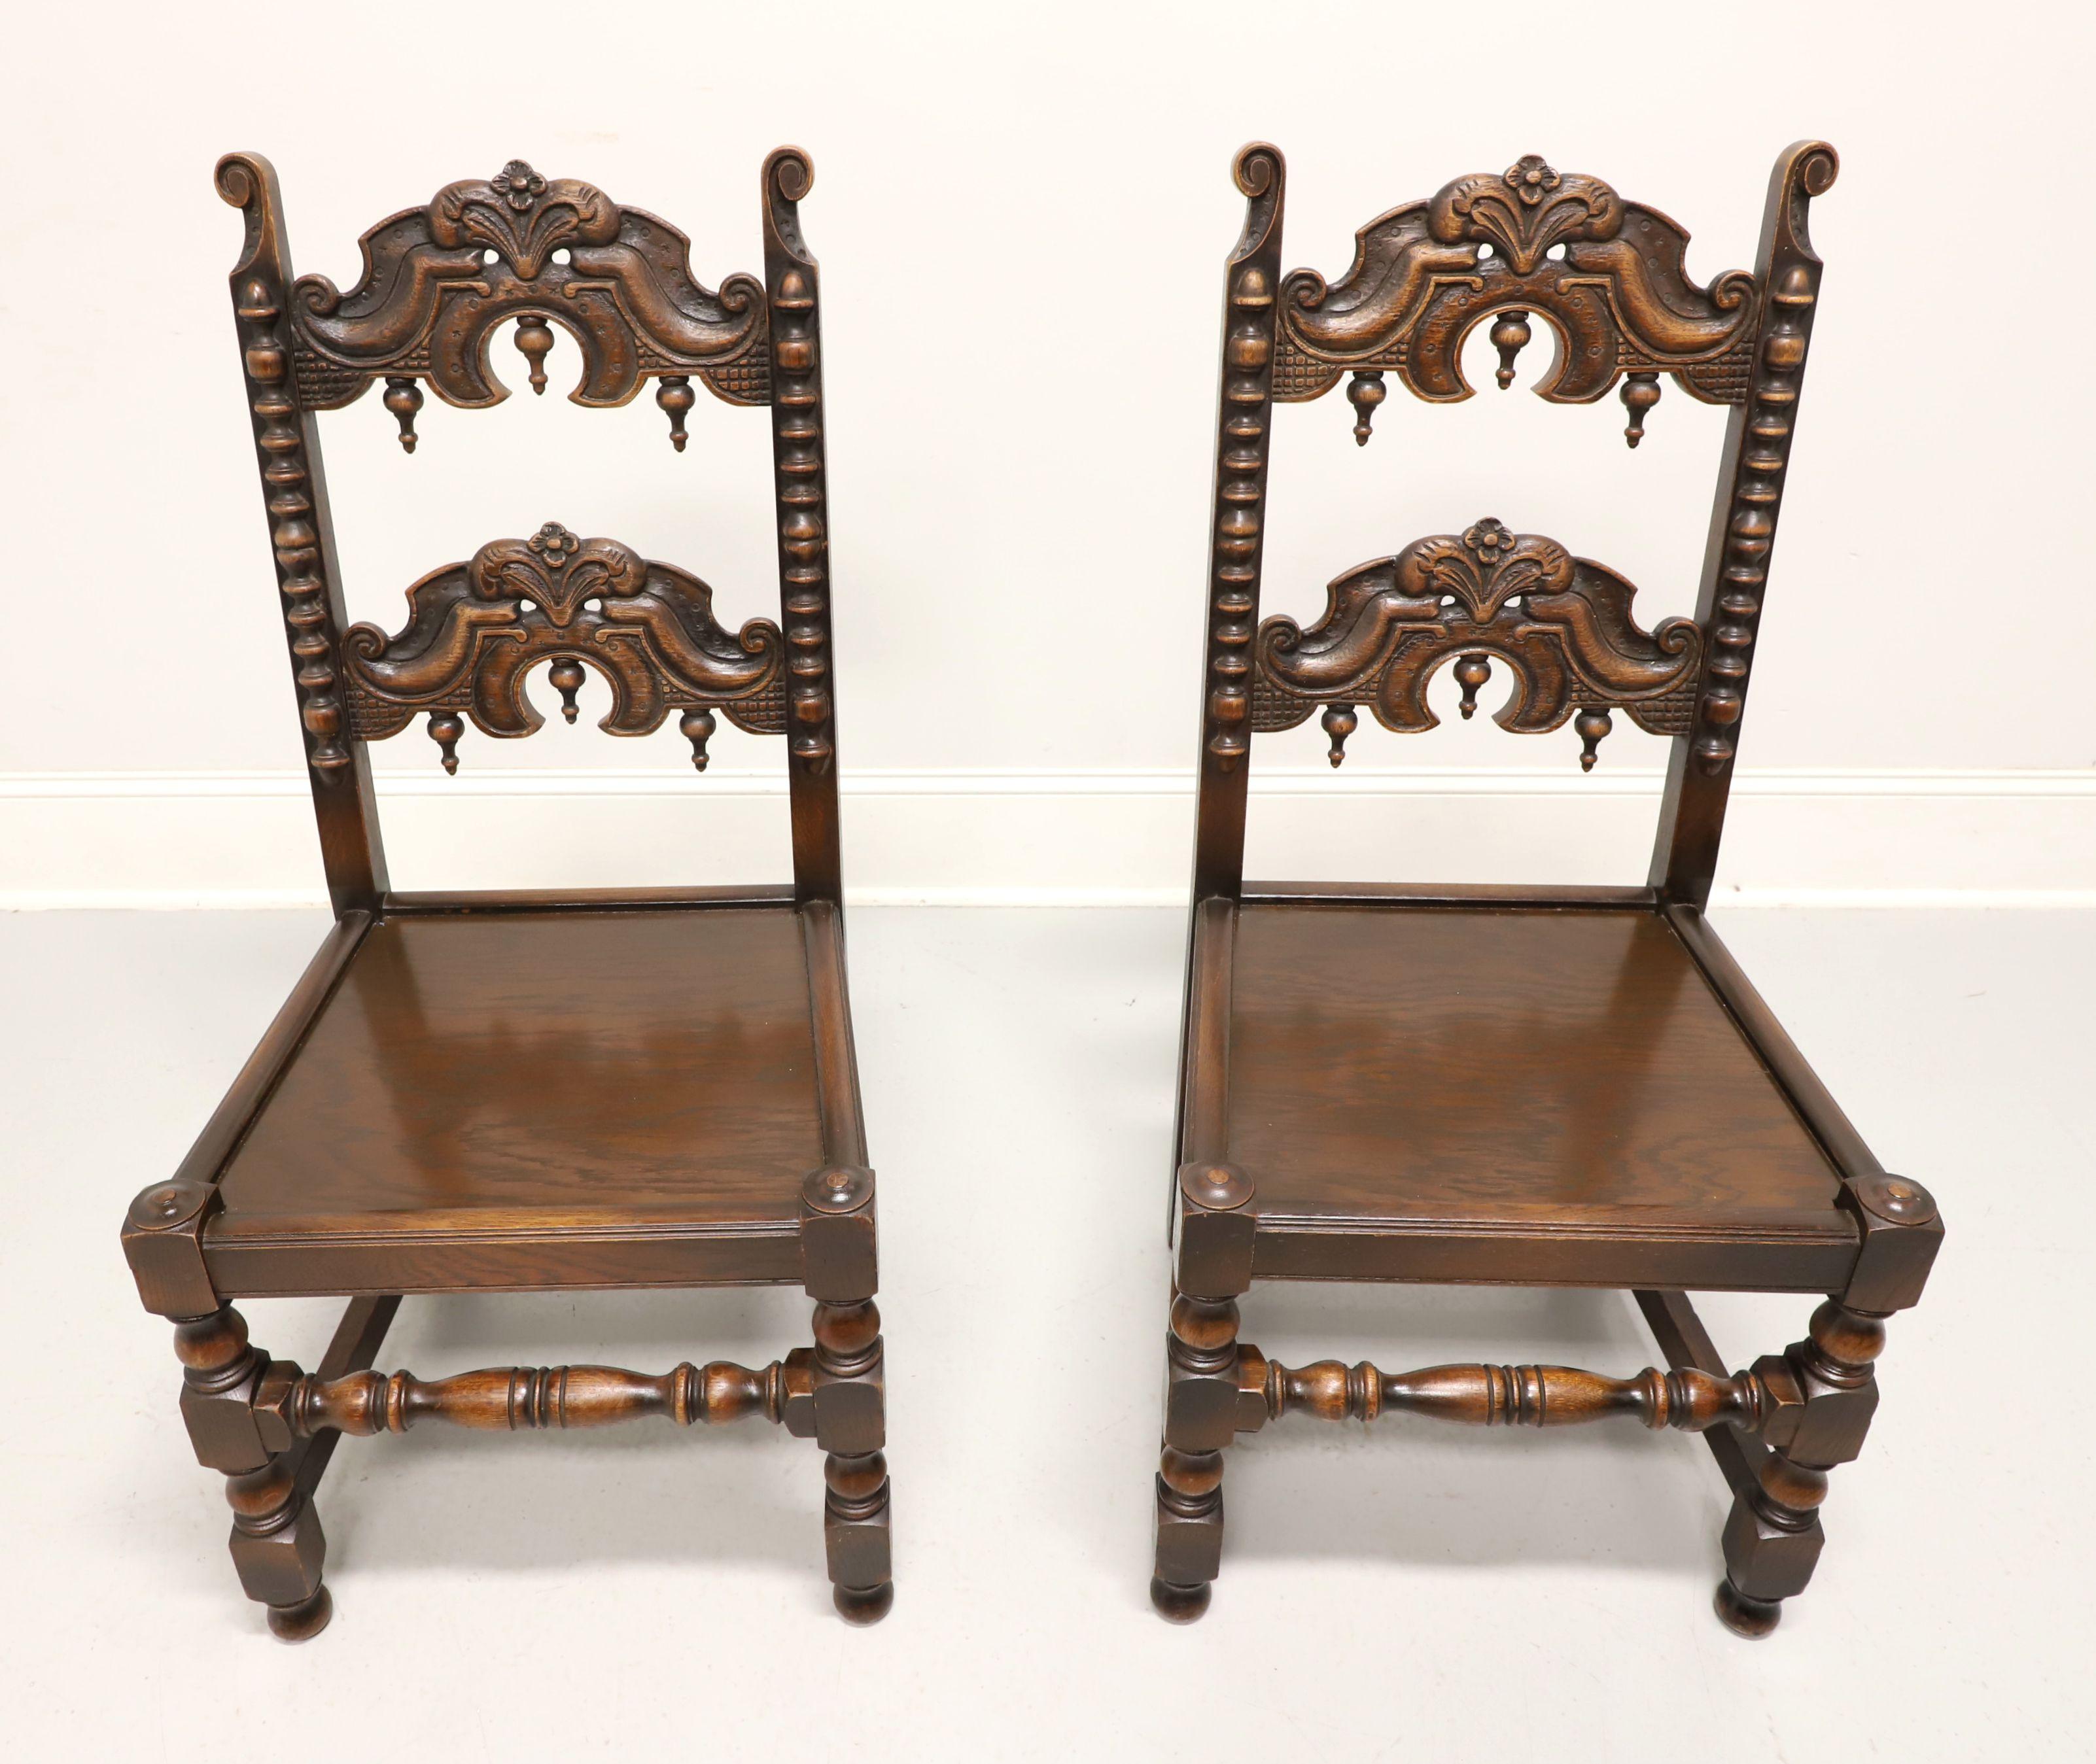 An antique pair of Gothic Revival style dining side chairs by Grand Rapids Bookcase and Chair Company. Solid oak with carved and turned details. Features a decoratively carved ladder back with inverted finials, carved stiles, solid seat, turned